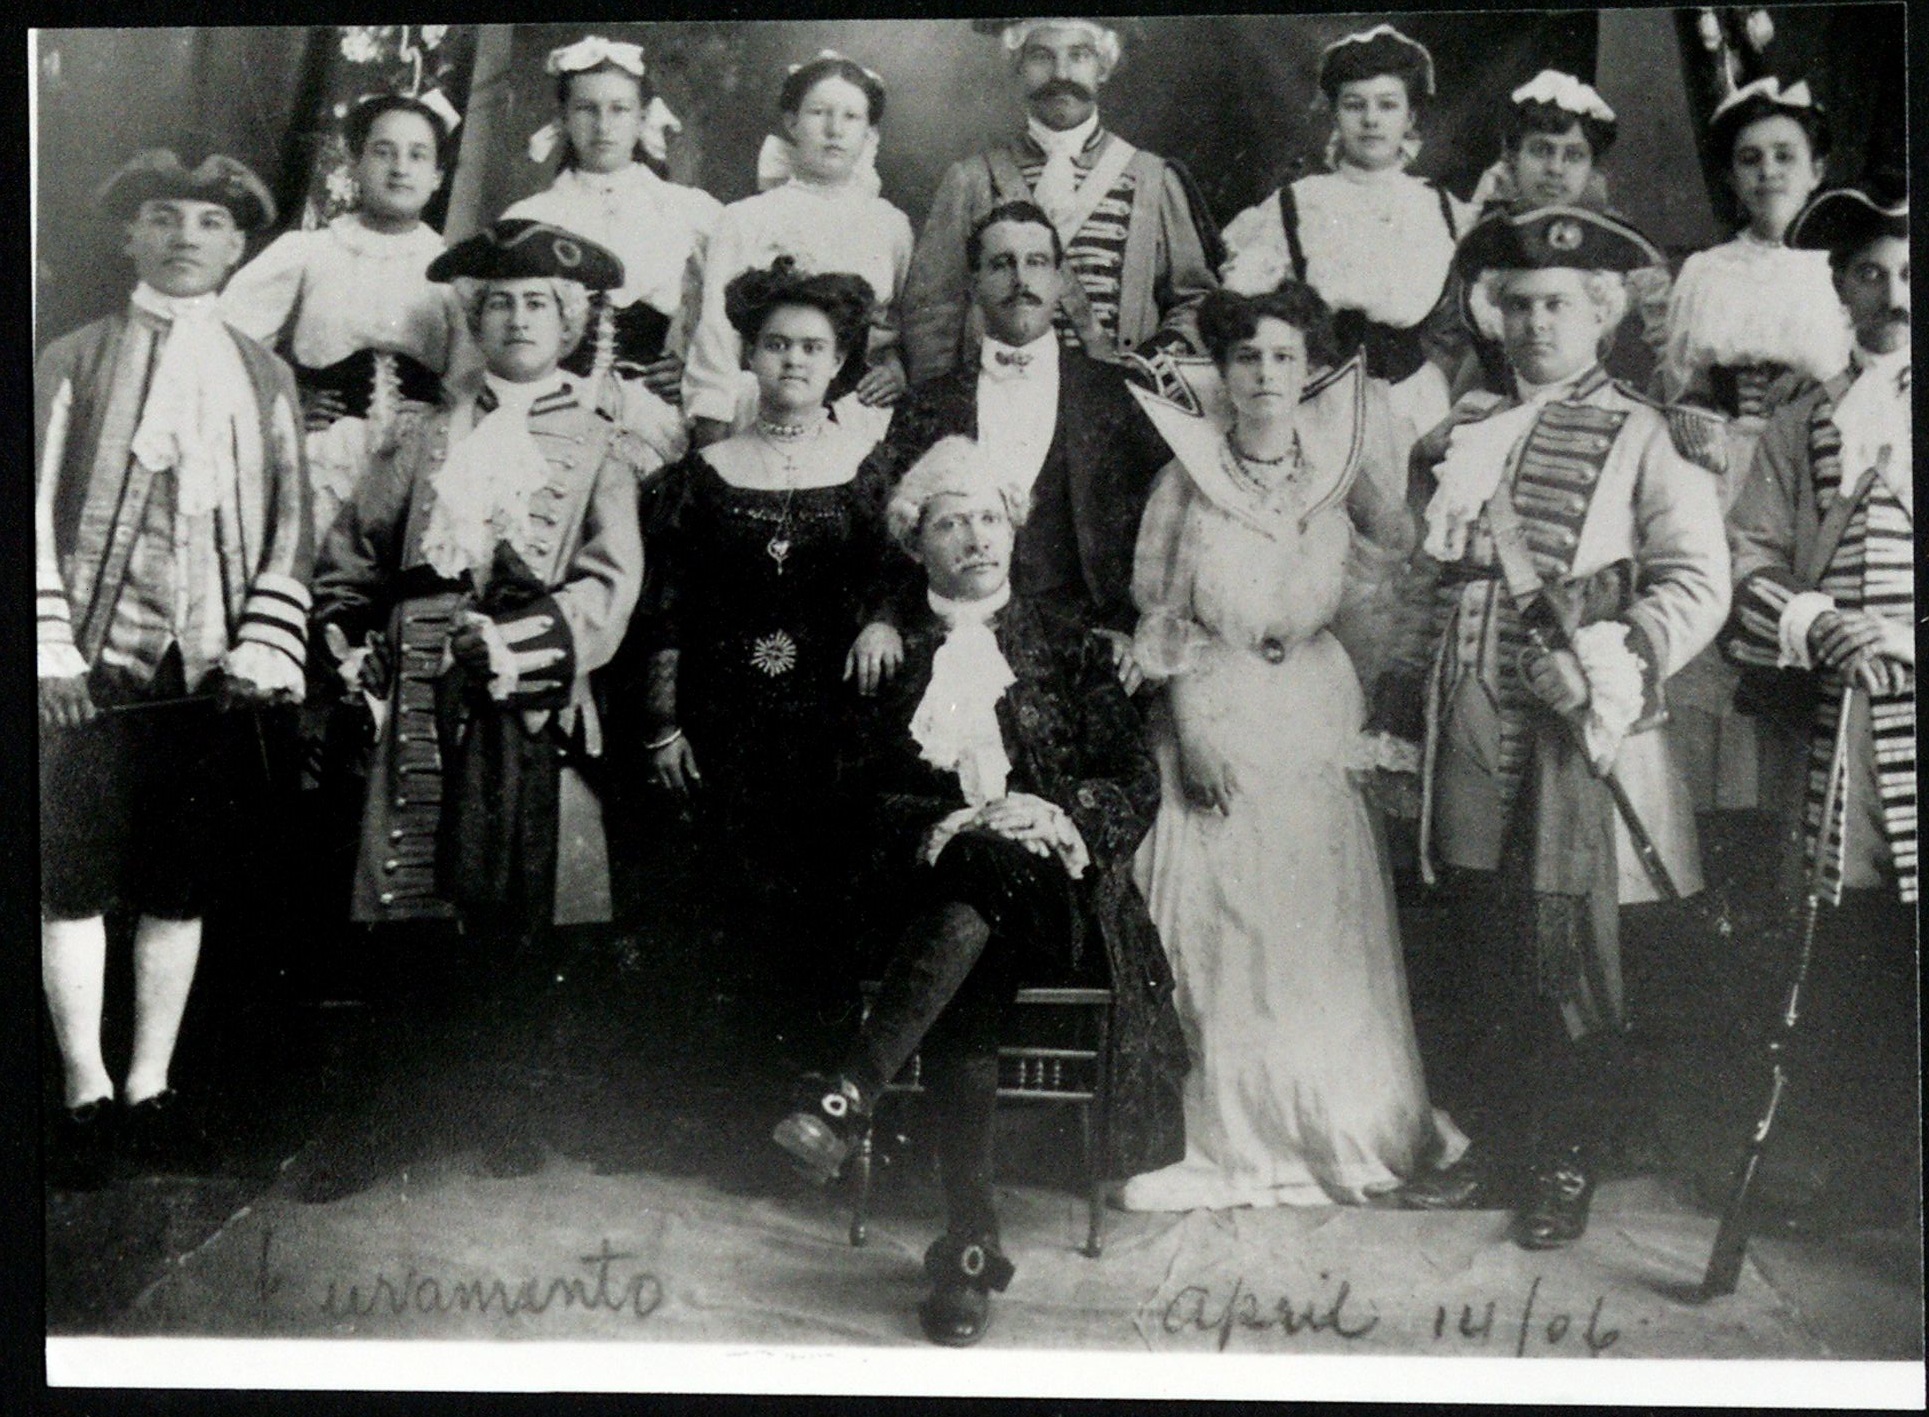 Black and white photograph of an unknown touring company